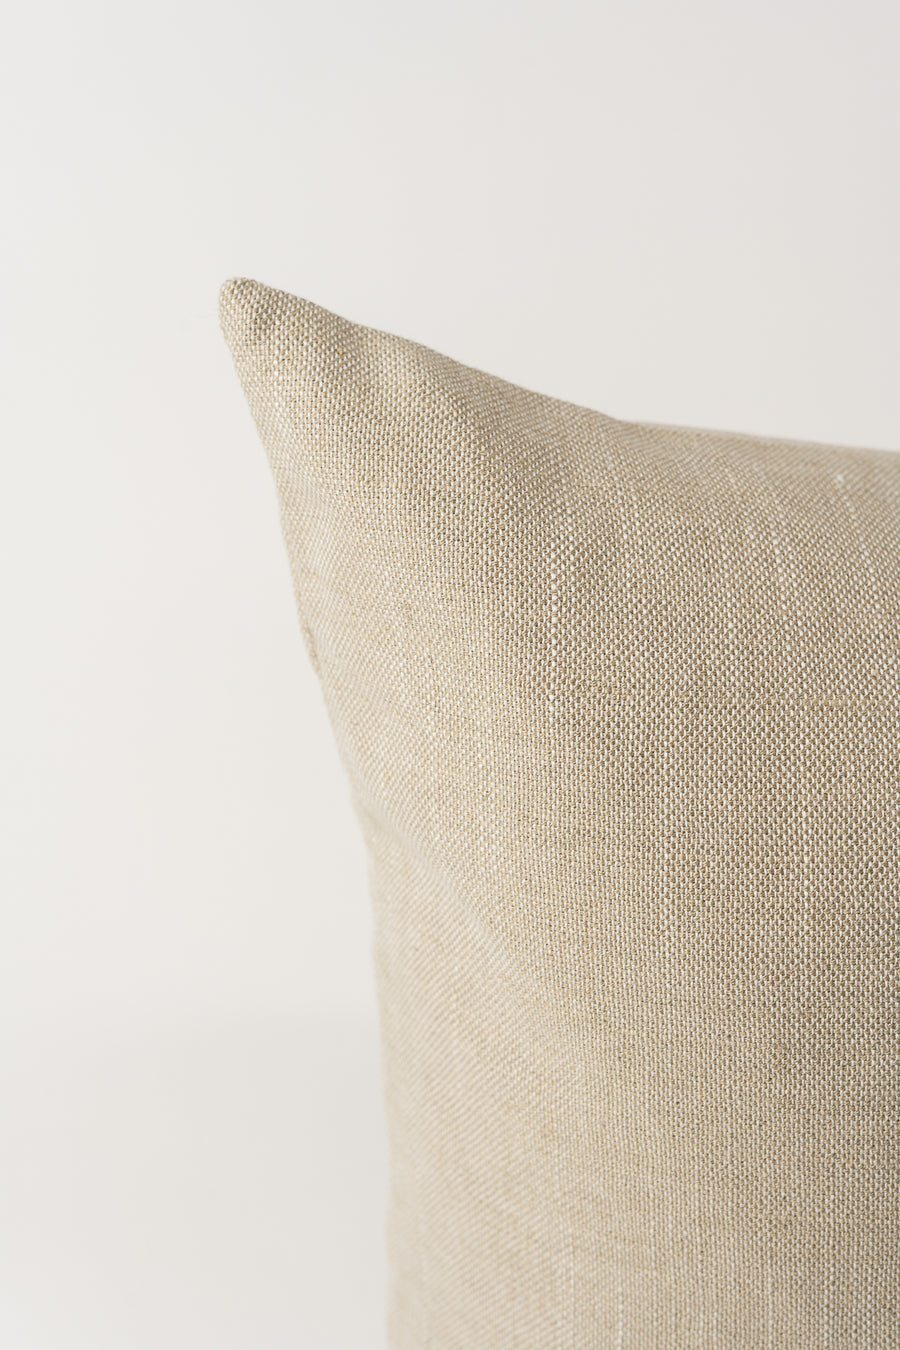 Kindred Cushion - Taupe Linen